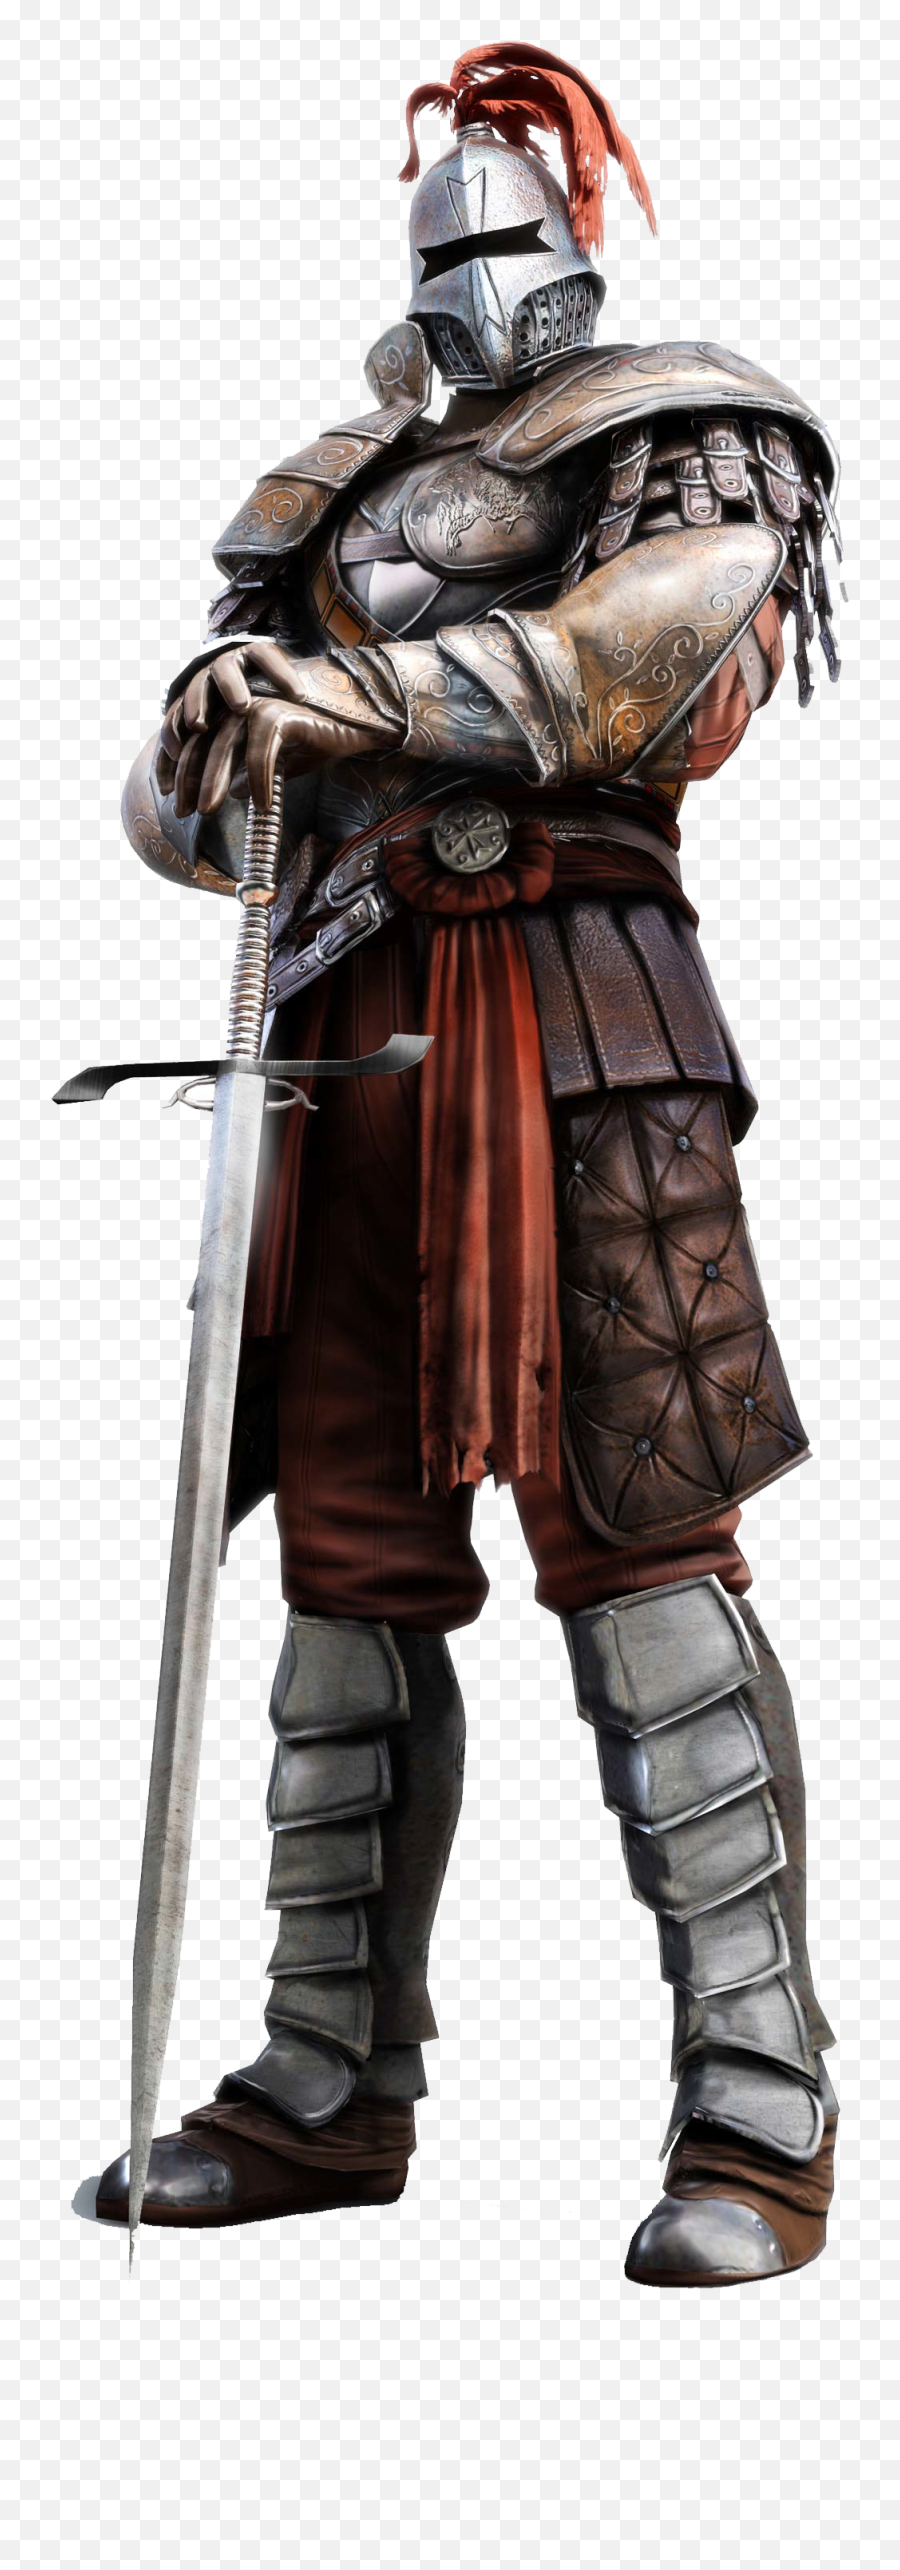 Warrior Free Png Transparent Image - Knight In Armor Gif,Warrior Png